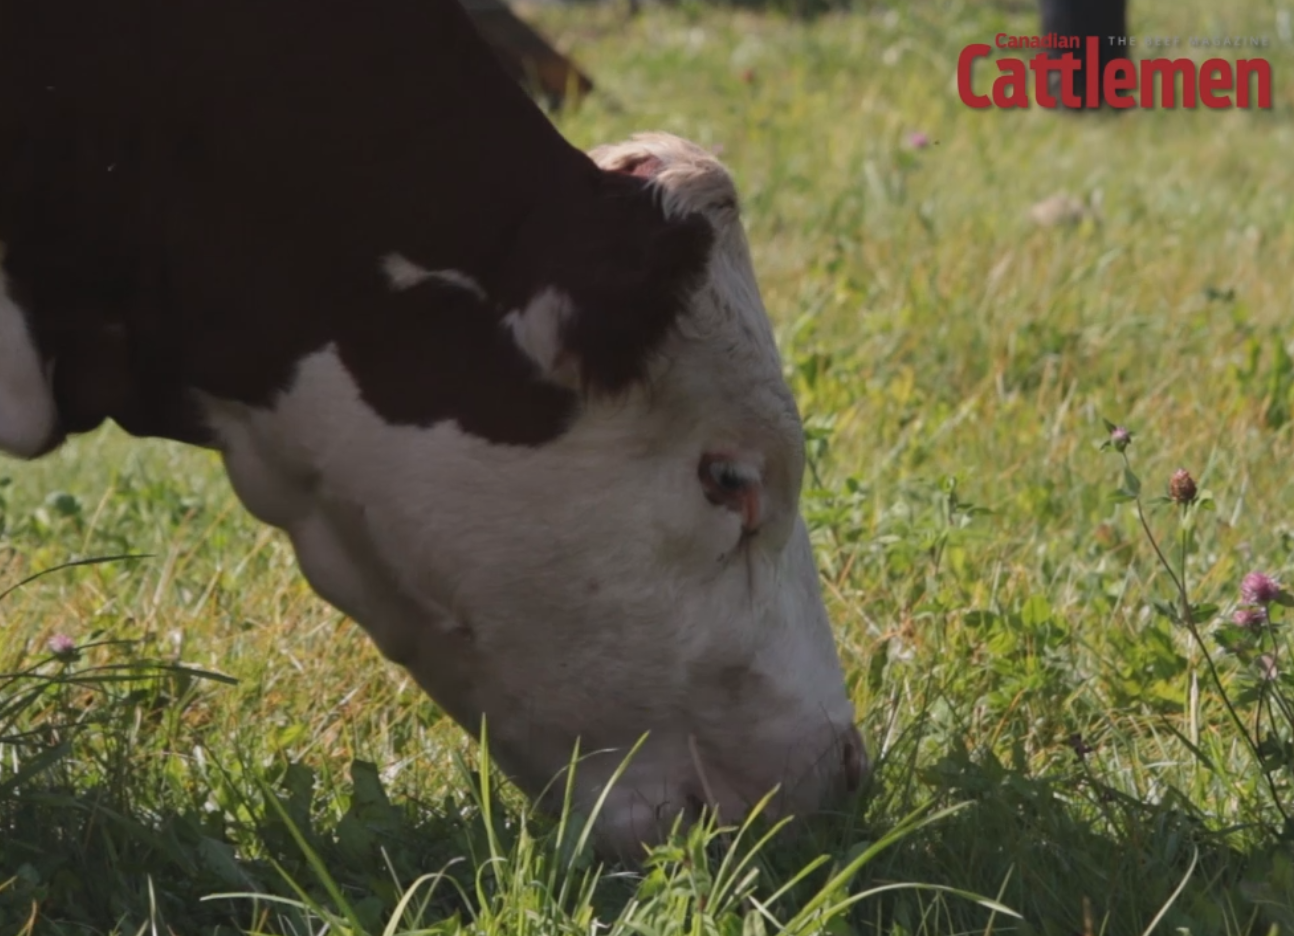 Cattle Management with Jake Kyle from Gallagher